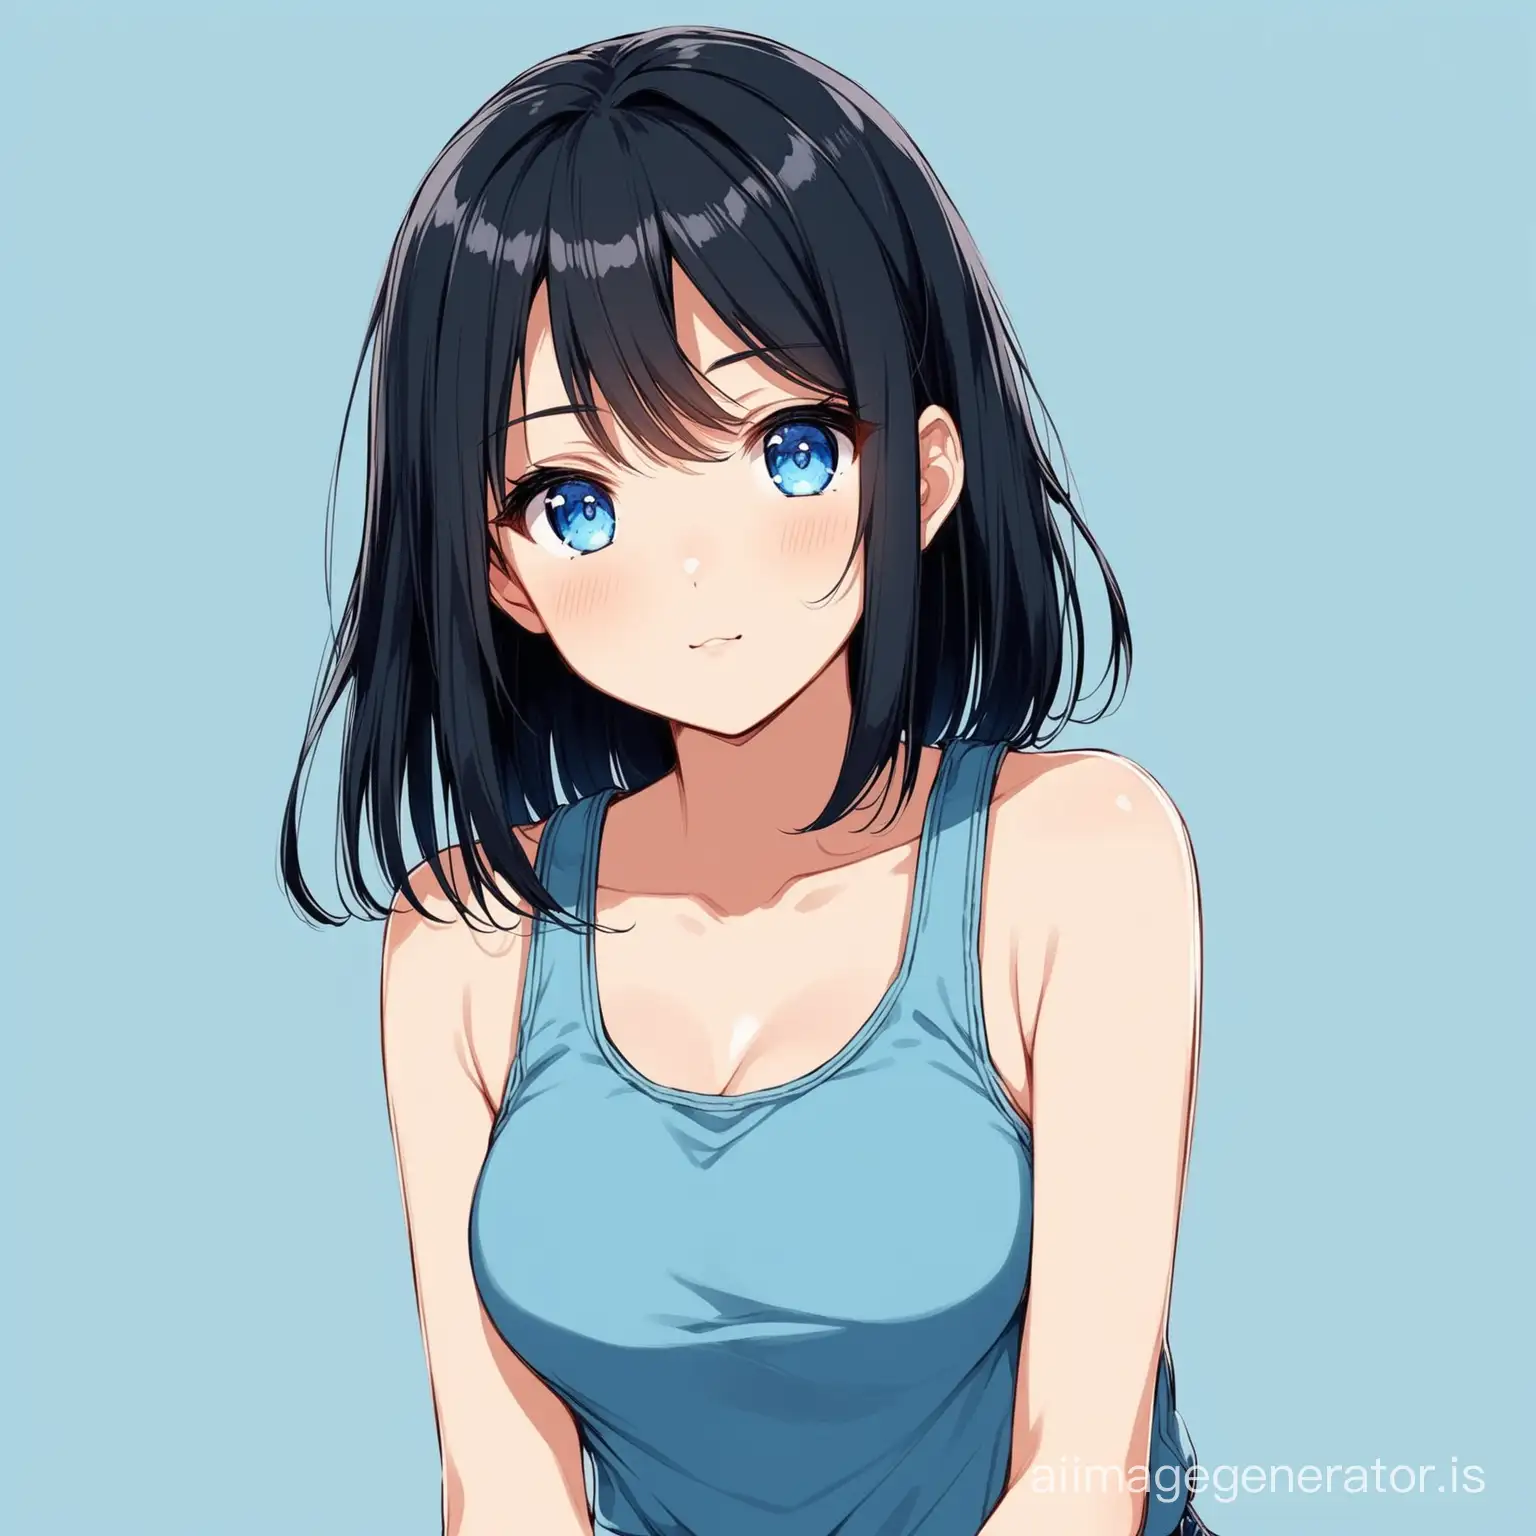 A cute anime girl with black hair and blue eyes in a tank top and blue jeans